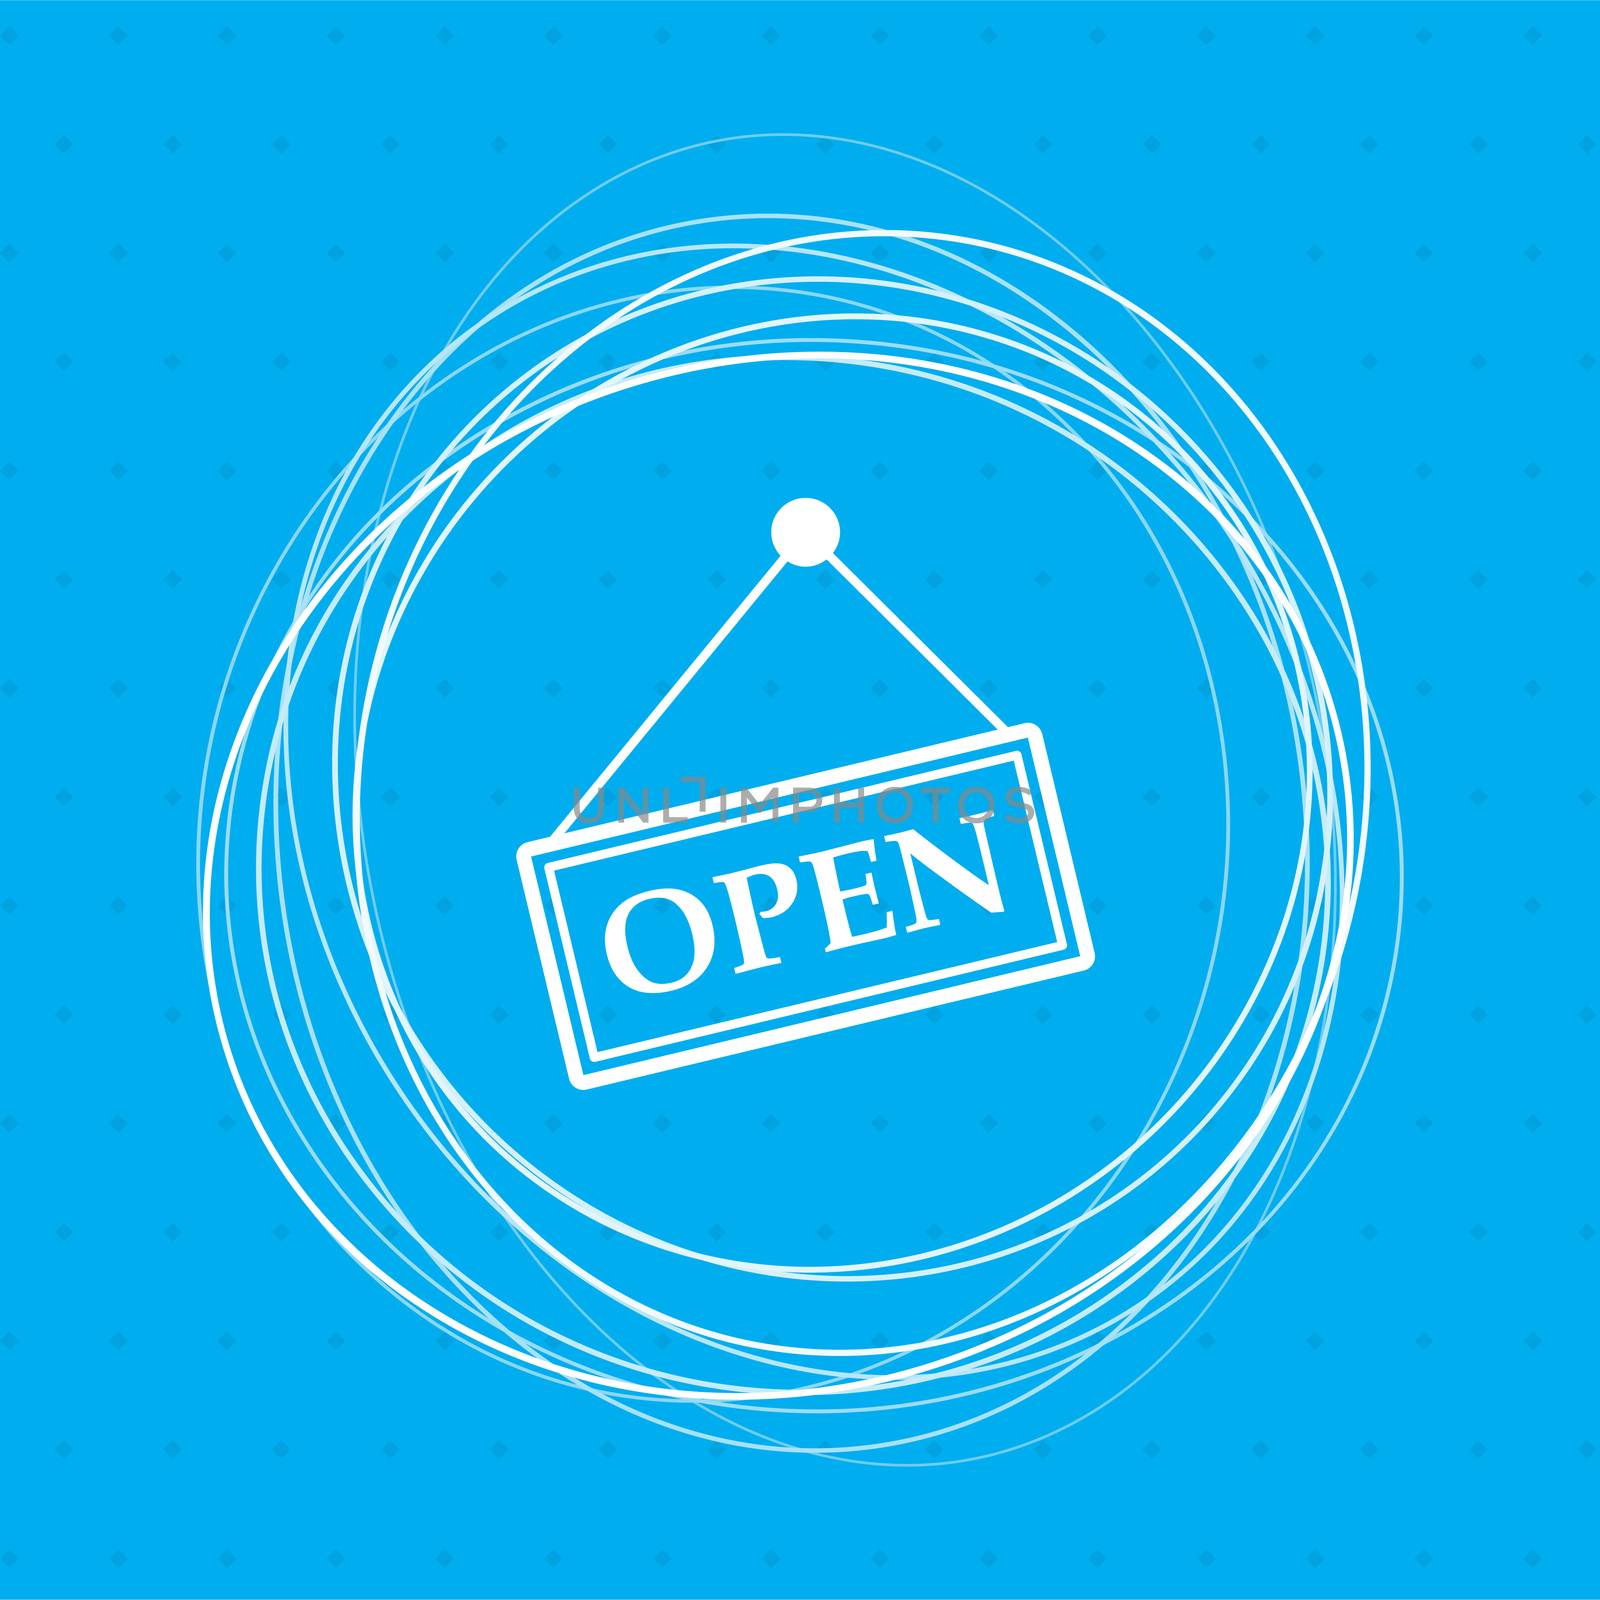 Open Icon on a blue background with abstract circles around and place for your text. illustration